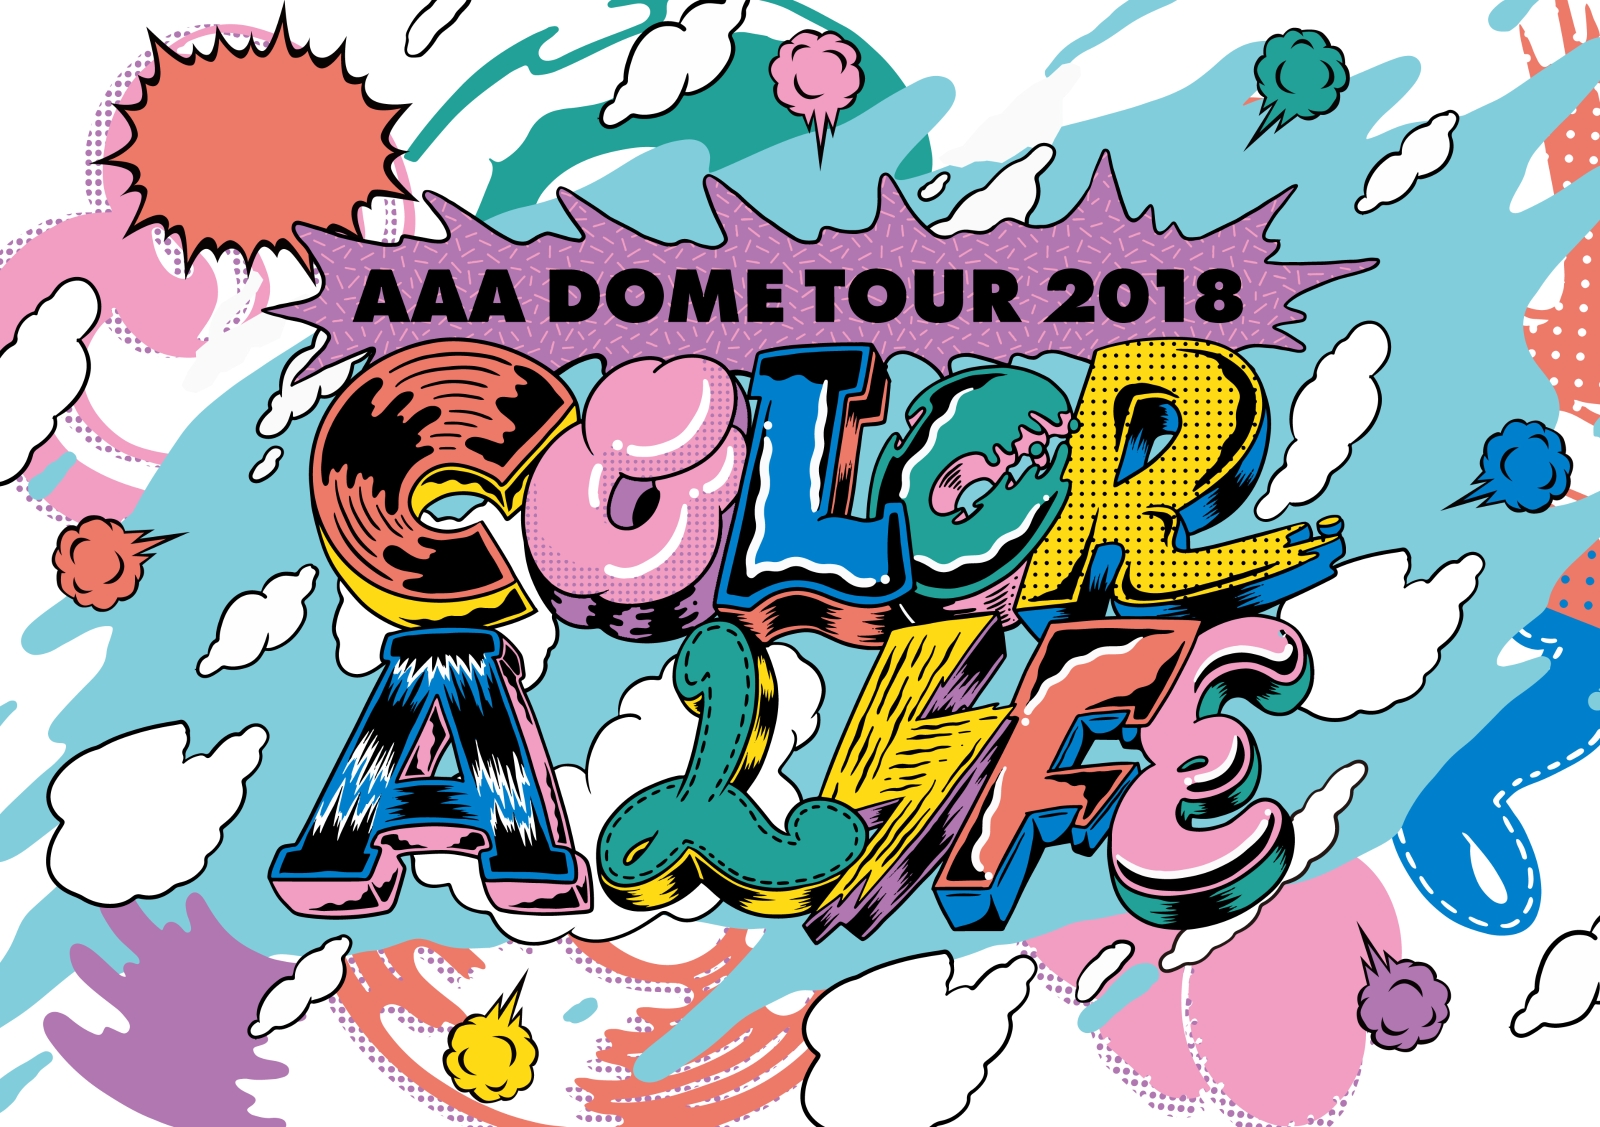 AAA DOME TOUR 2018 COLOR A LIFE(初回生産限定盤)(スマプラ対応)【Blu-ray】画像